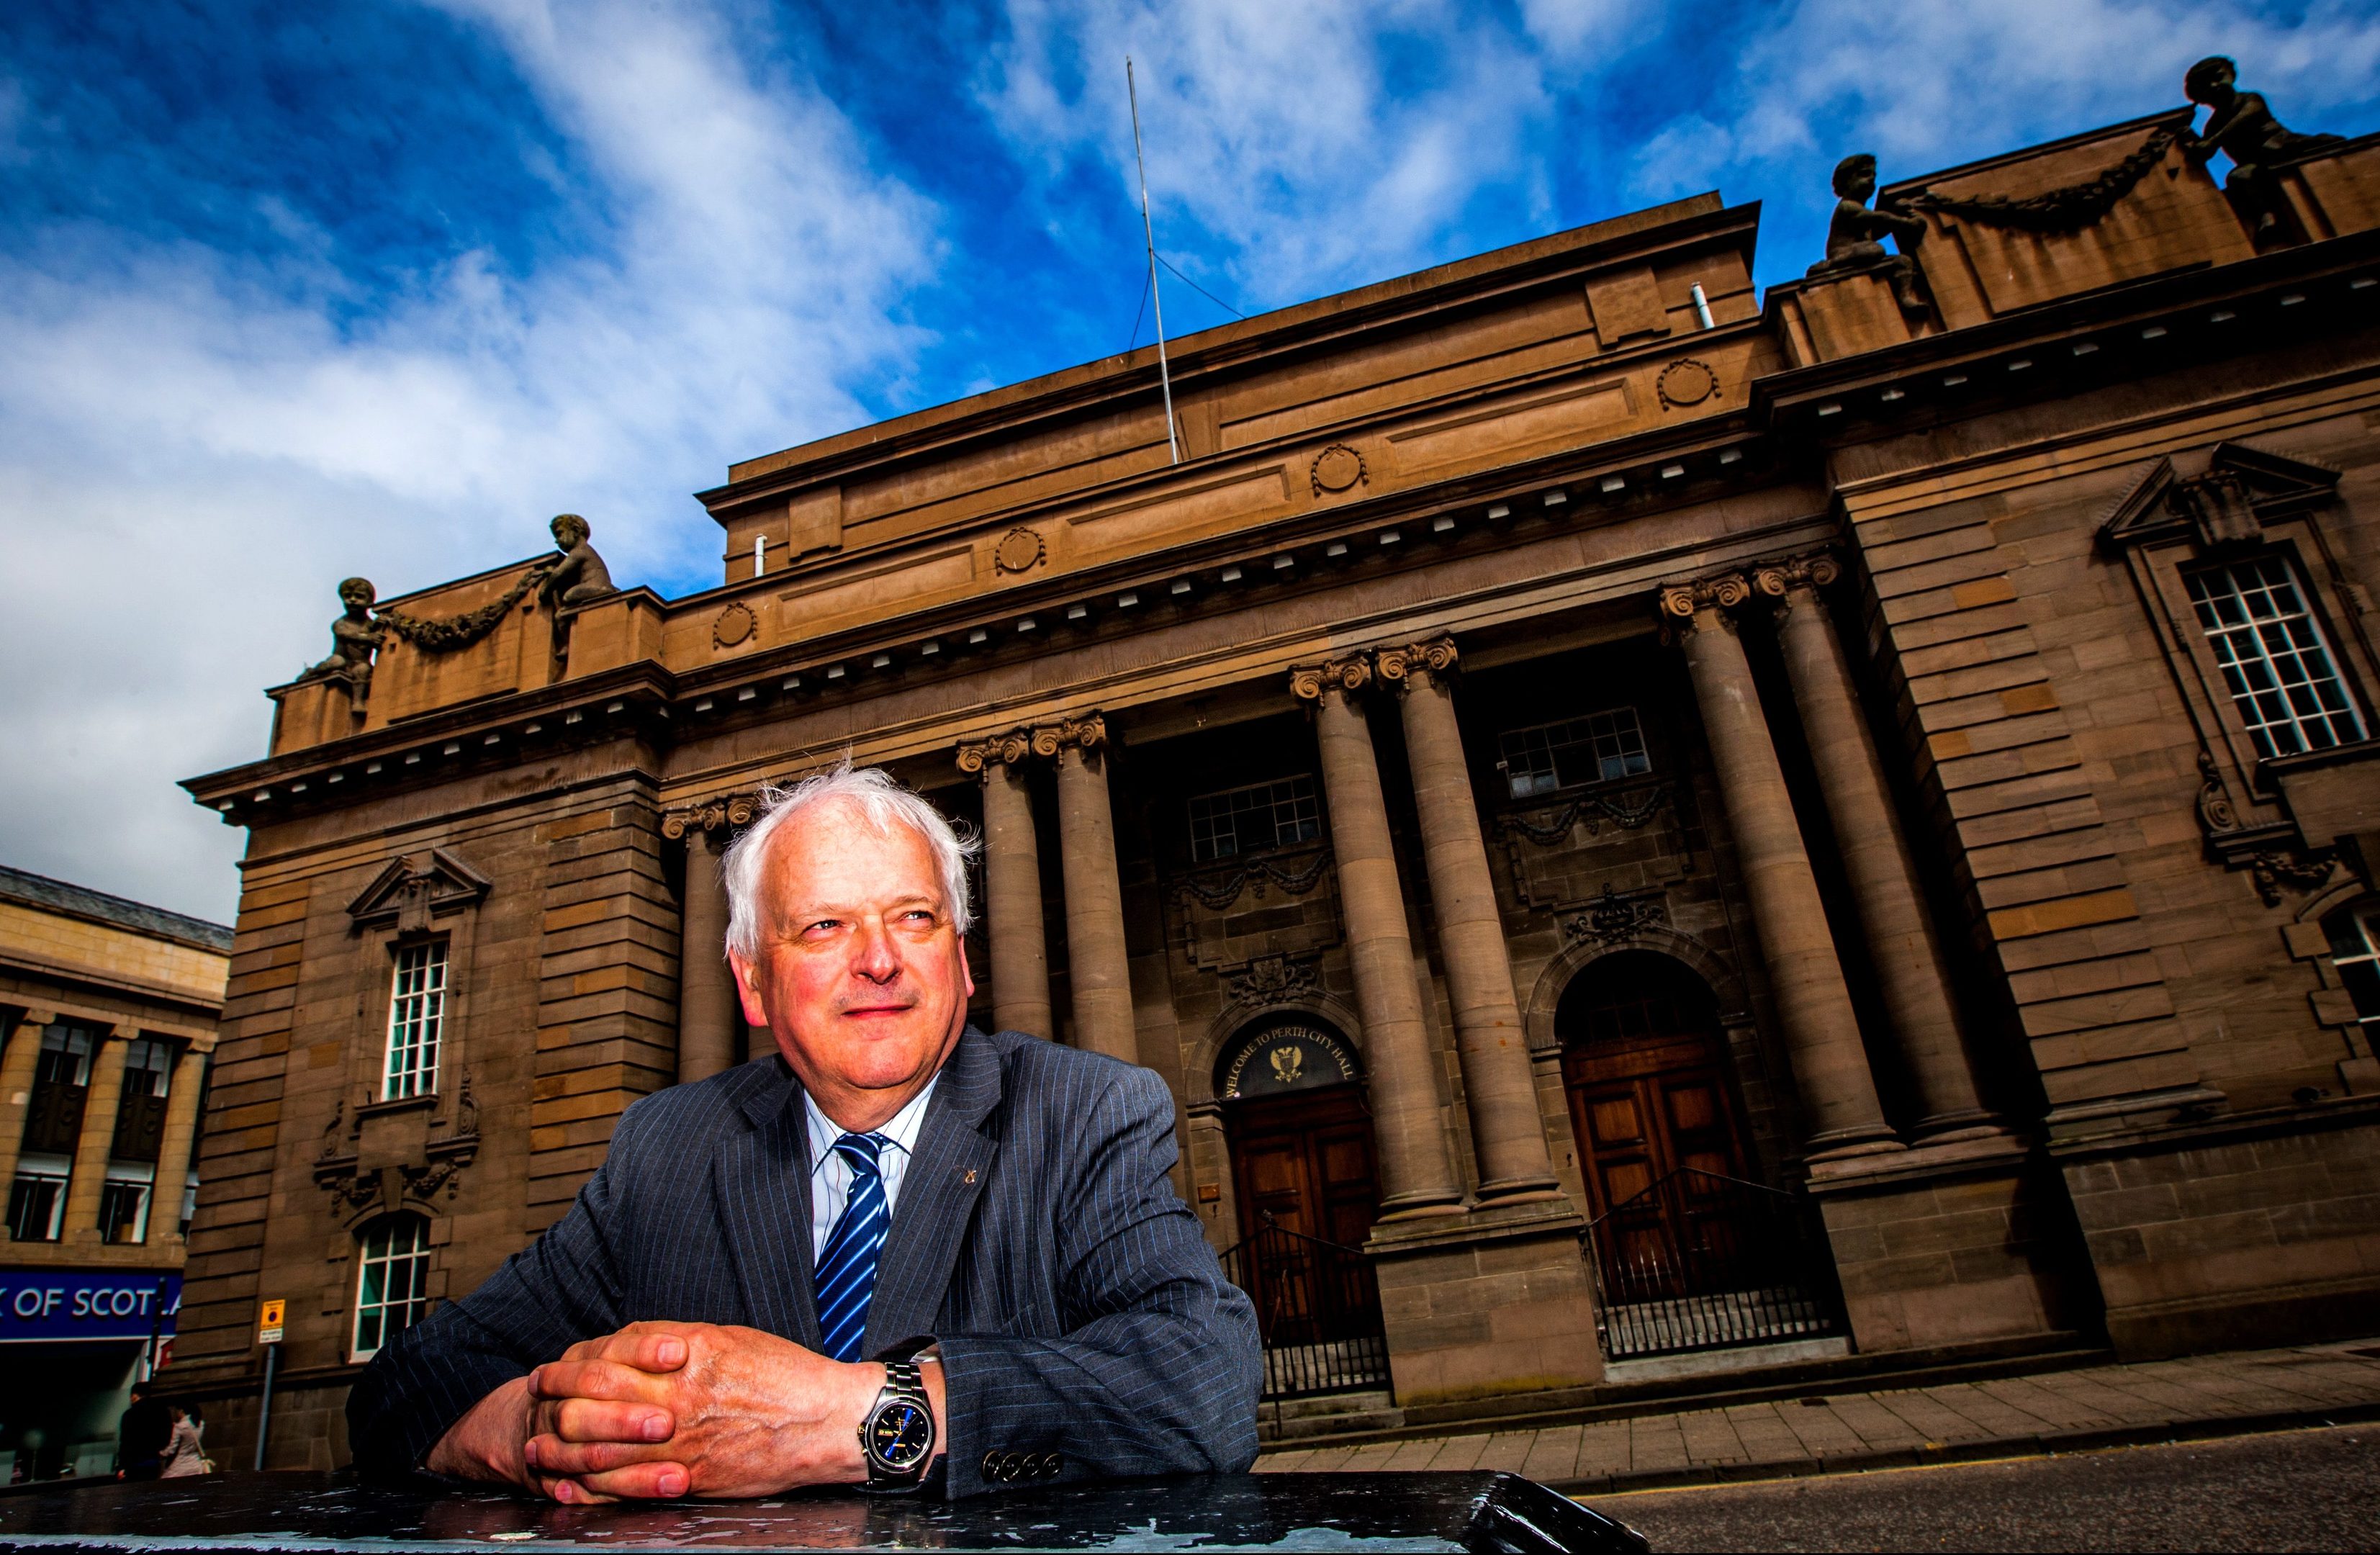 Perth and Kinross Council leader Ian Miller at Perth City Hall.